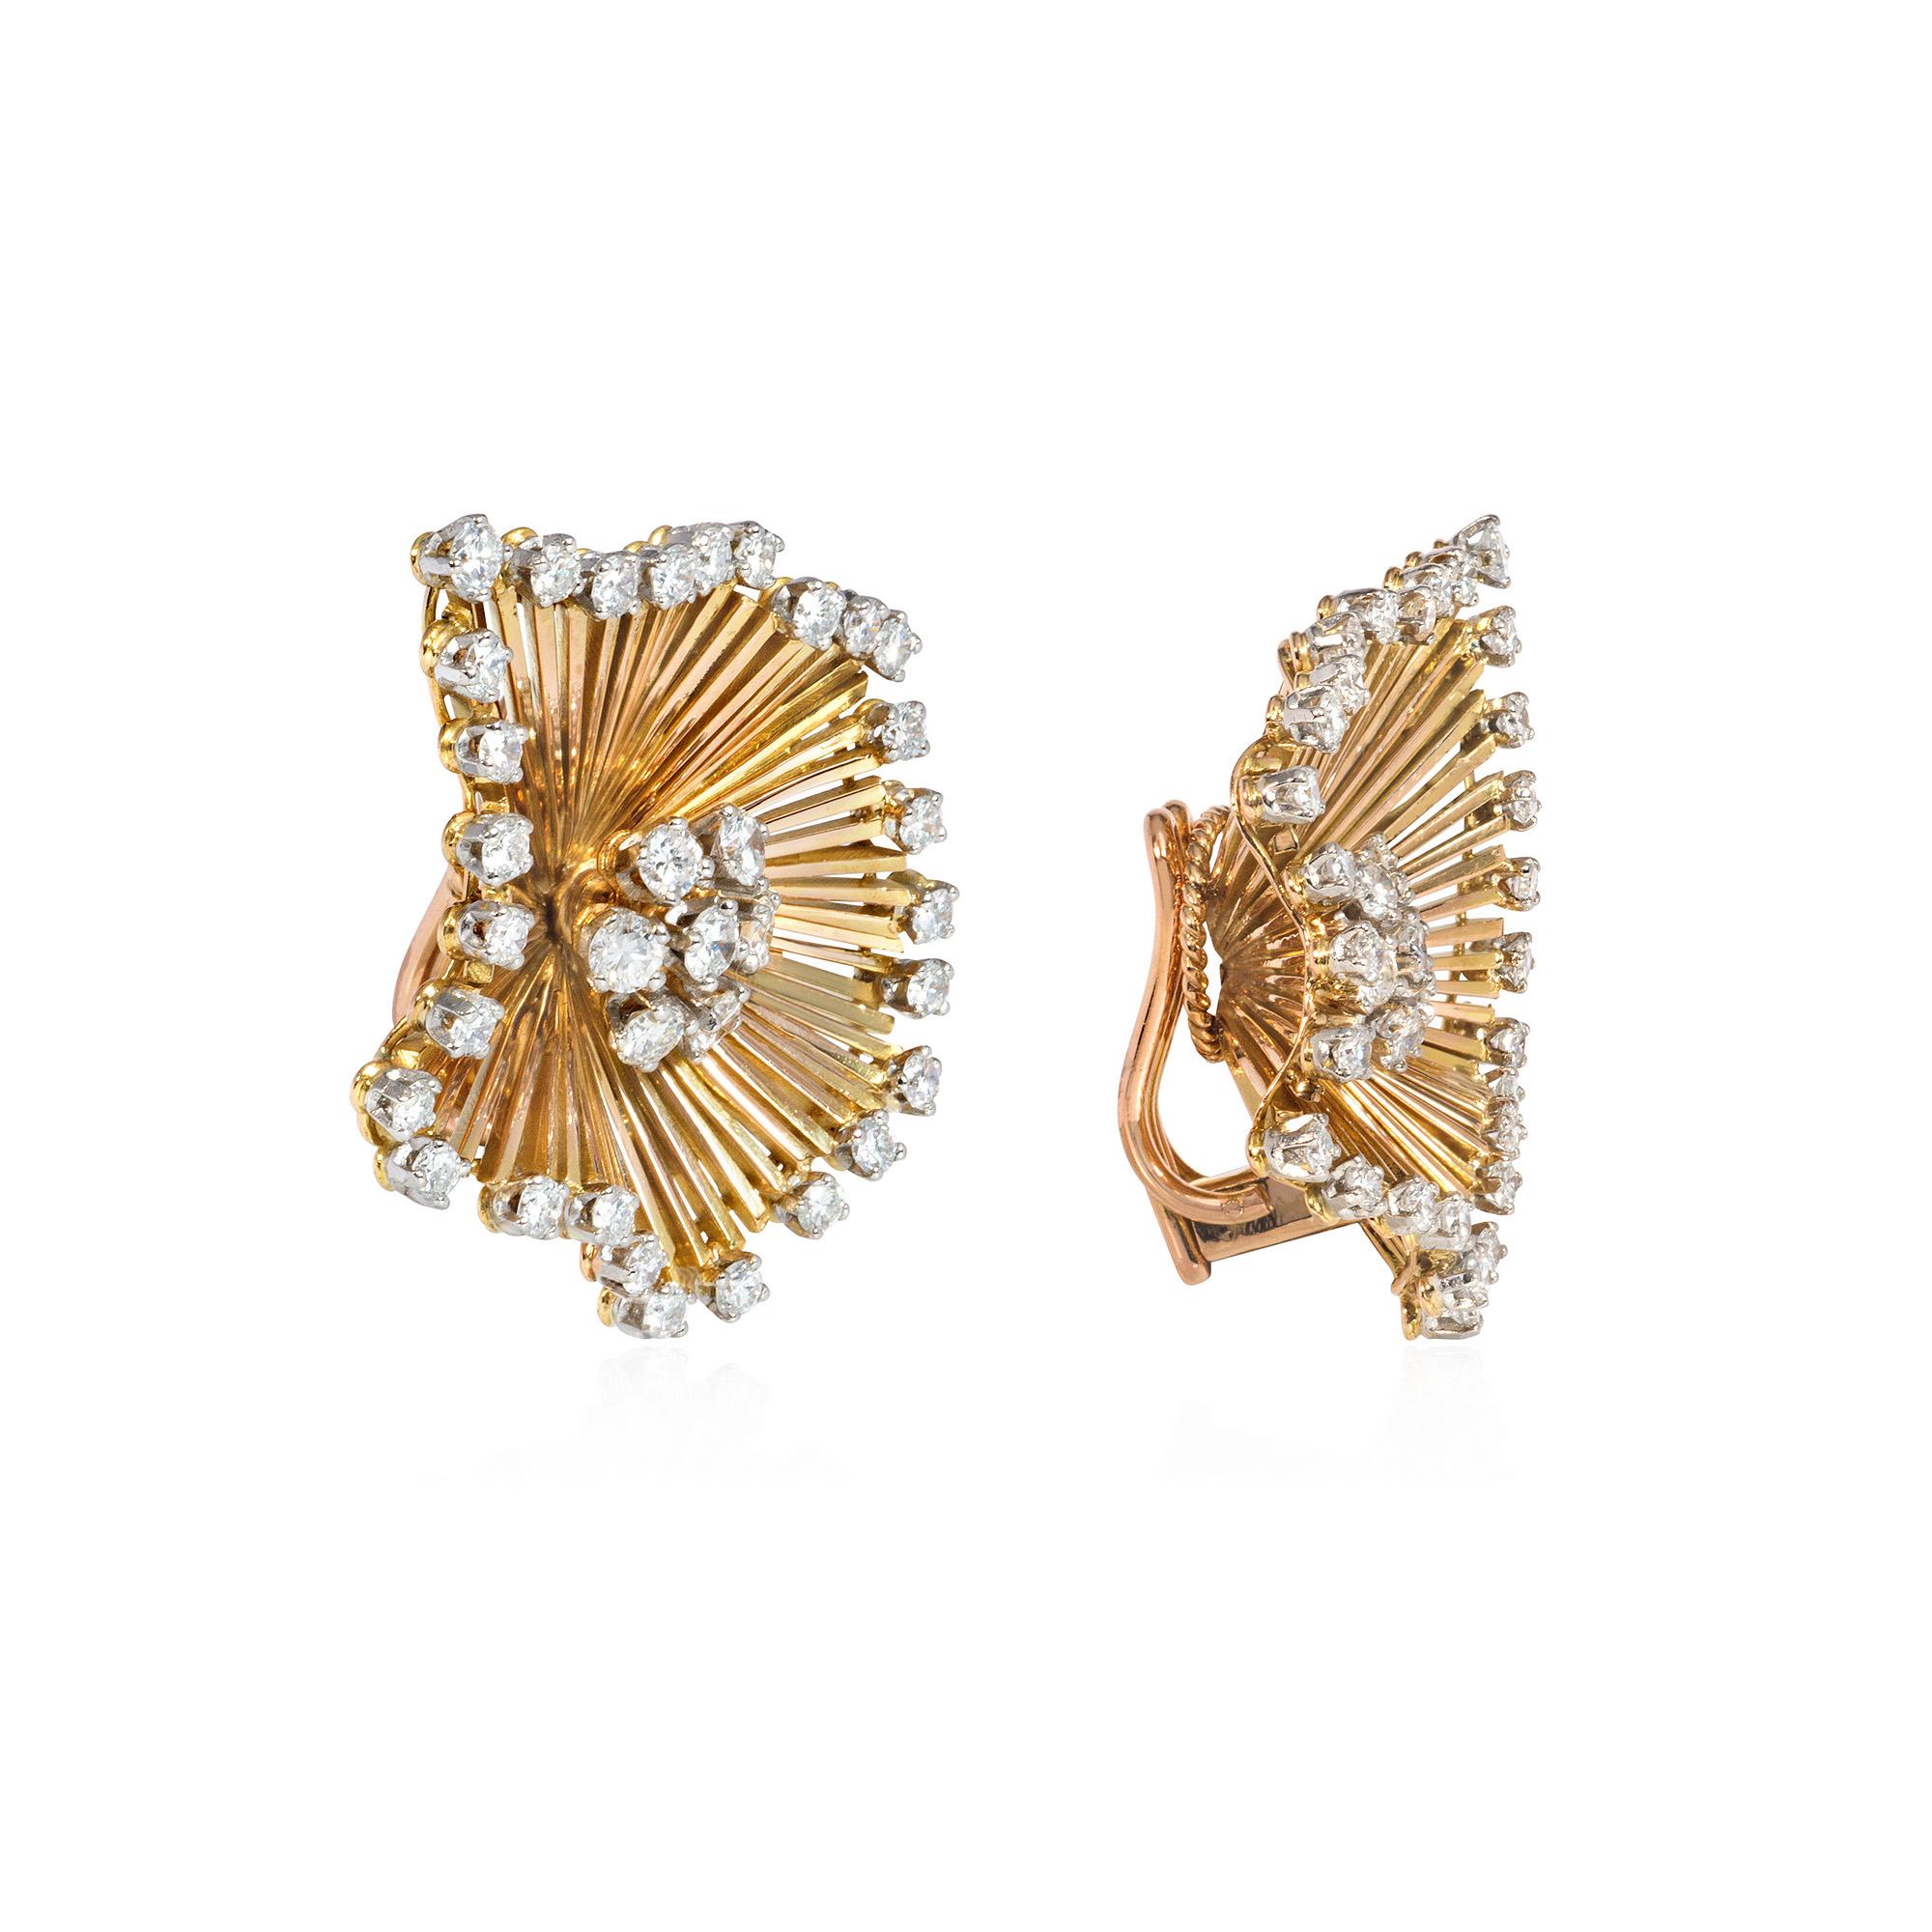 A pair of mid-century gold and diamond clip earrings of undulating burst design, with diamond cluster centers surrounded by finely graduated gold wire, terminating in a diamond border, in 18k. France. Atw 1.84 ct.